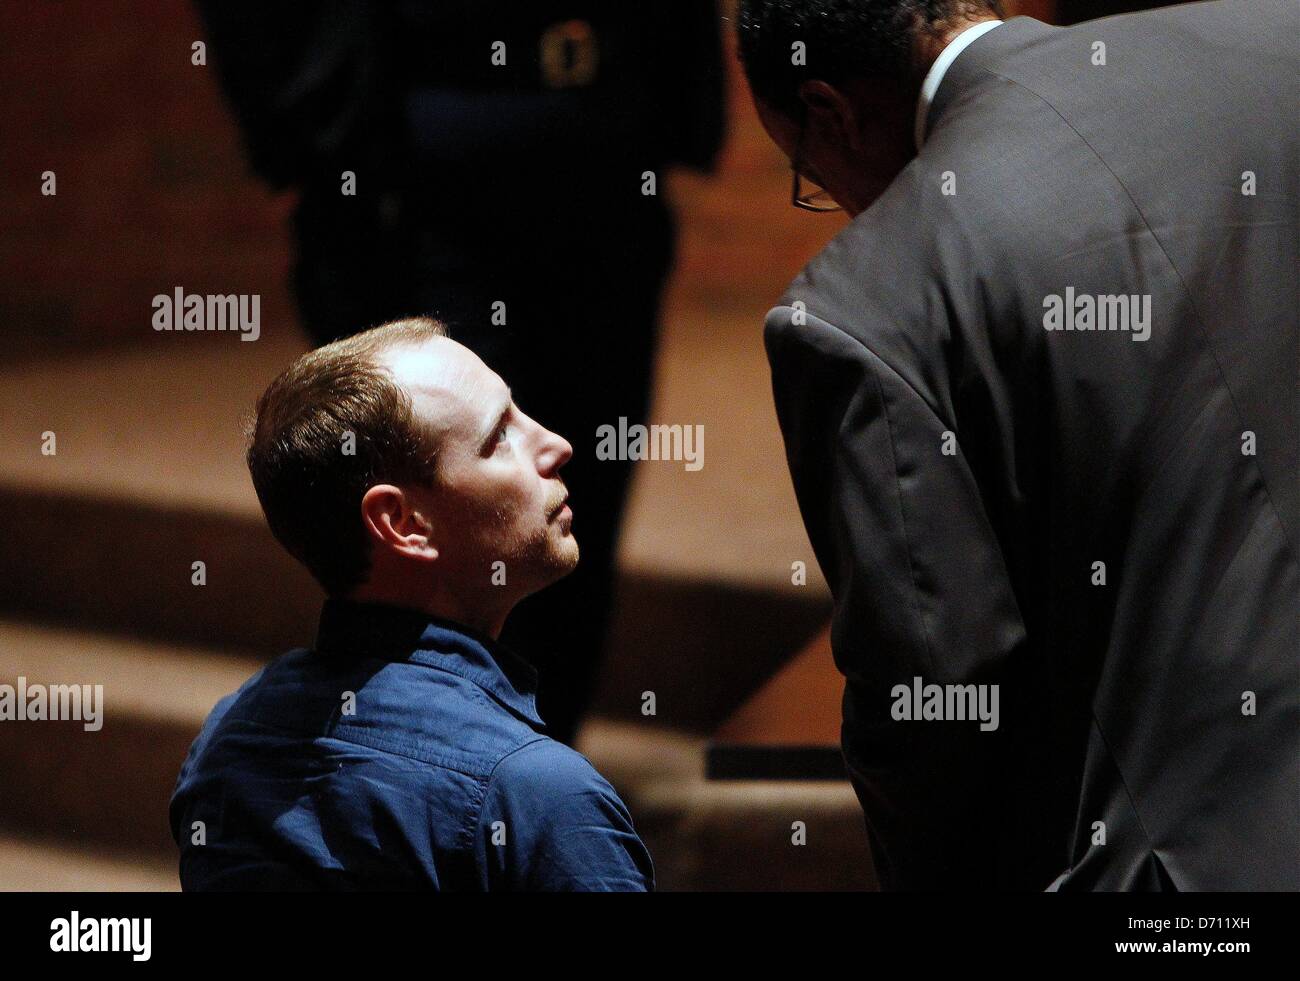 April 24, 2013 - Germantown, Tenn, U.S. - April 24, 2013 - Chris Jones (left) appears in a Germantown court on the charge of second-degree murder Wednesday in the death of his wife Heather Palumbo-Jones. (Credit Image: © Mark Weber/The Commercial Appeal/ZUMAPRESS.com) Stock Photo